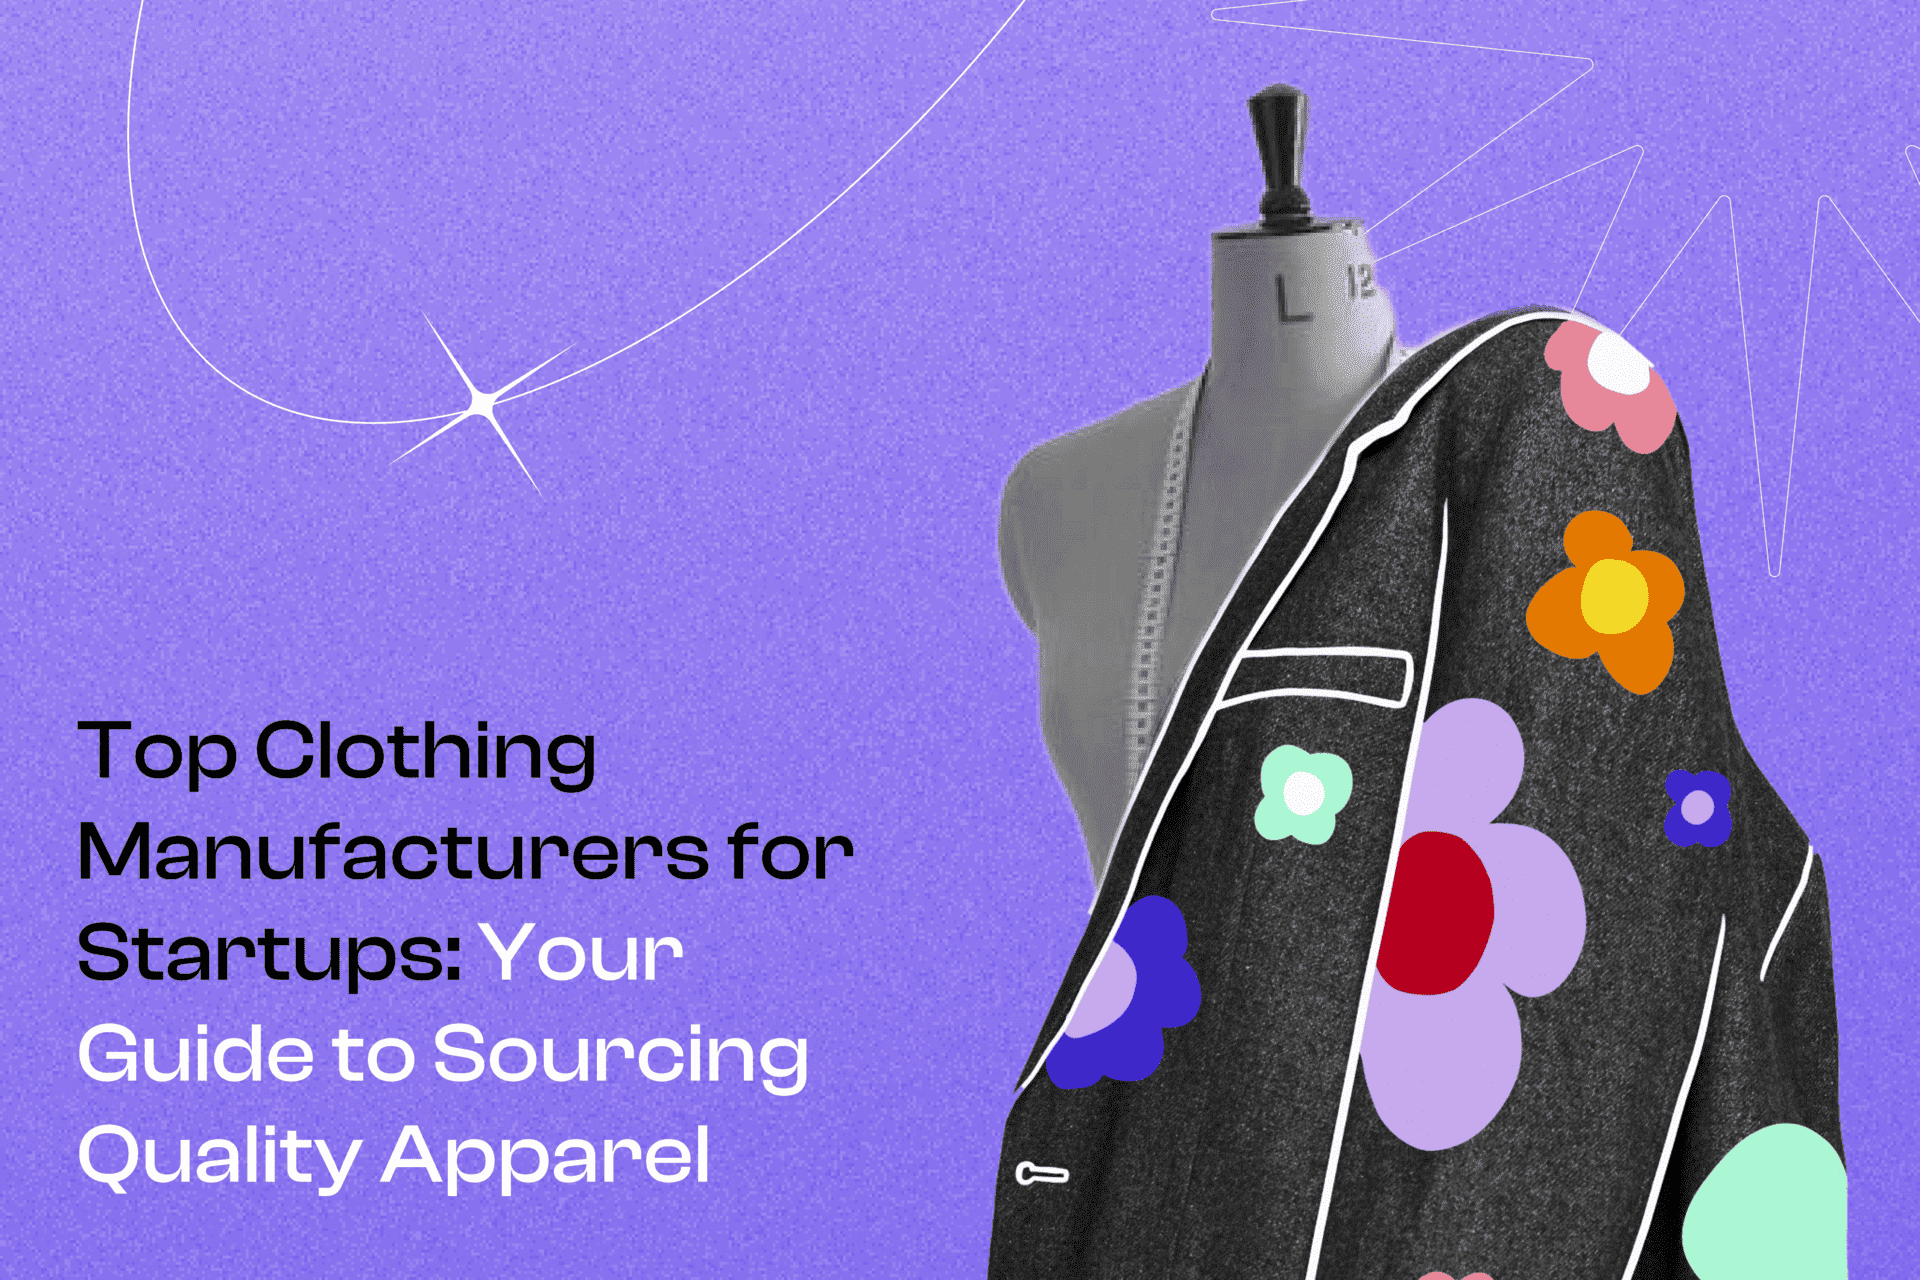 Top Clothing Manufacturers for Startups: Your Guide to Sourcing